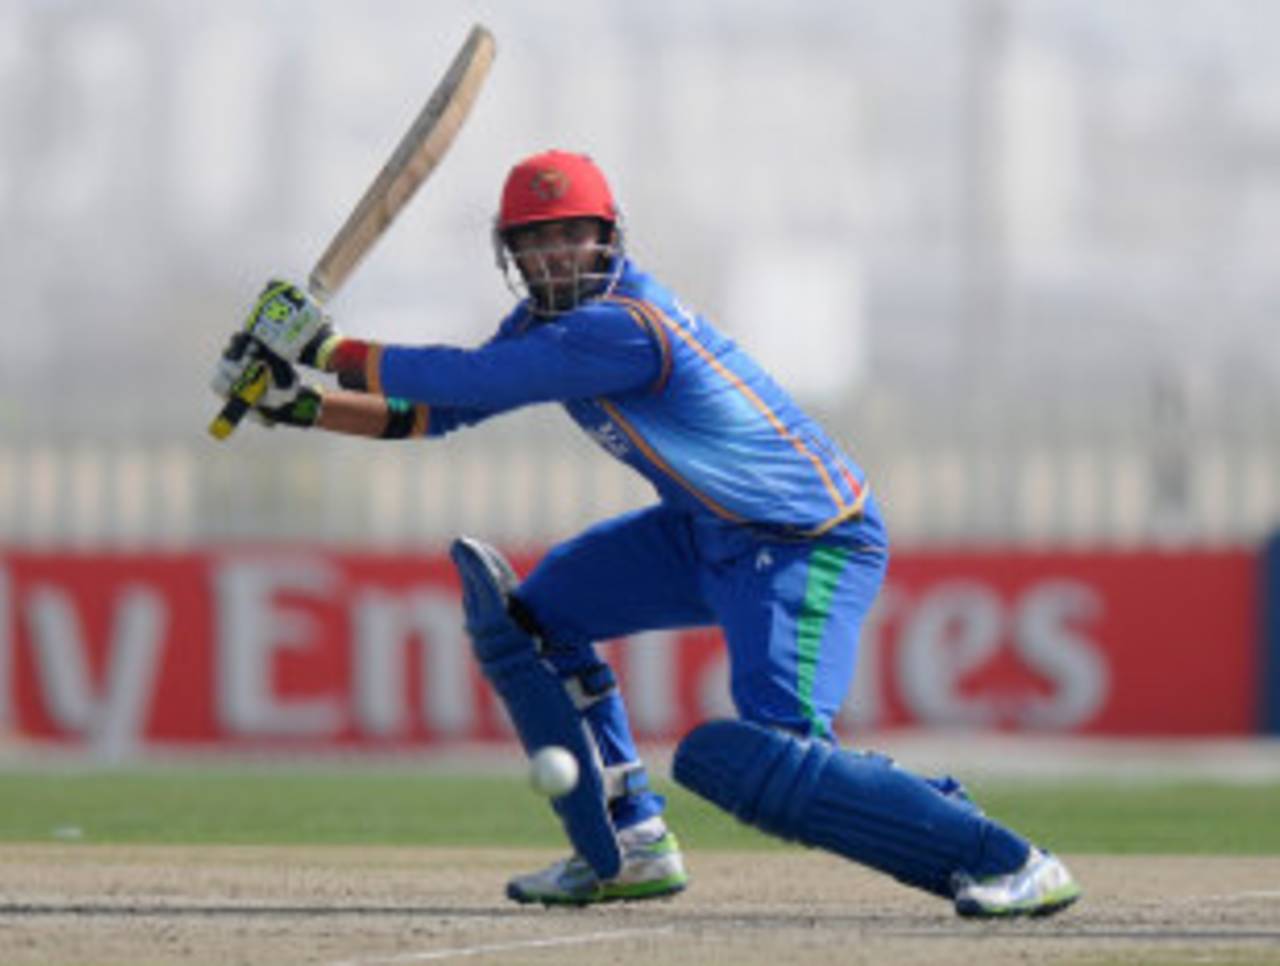 Afghanistan Under-19 opener Mohammad Mujtaba top scored with 75, Afghanistan v Australia, Under-19 World Cup, Abu Dhabi, February 17, 2014